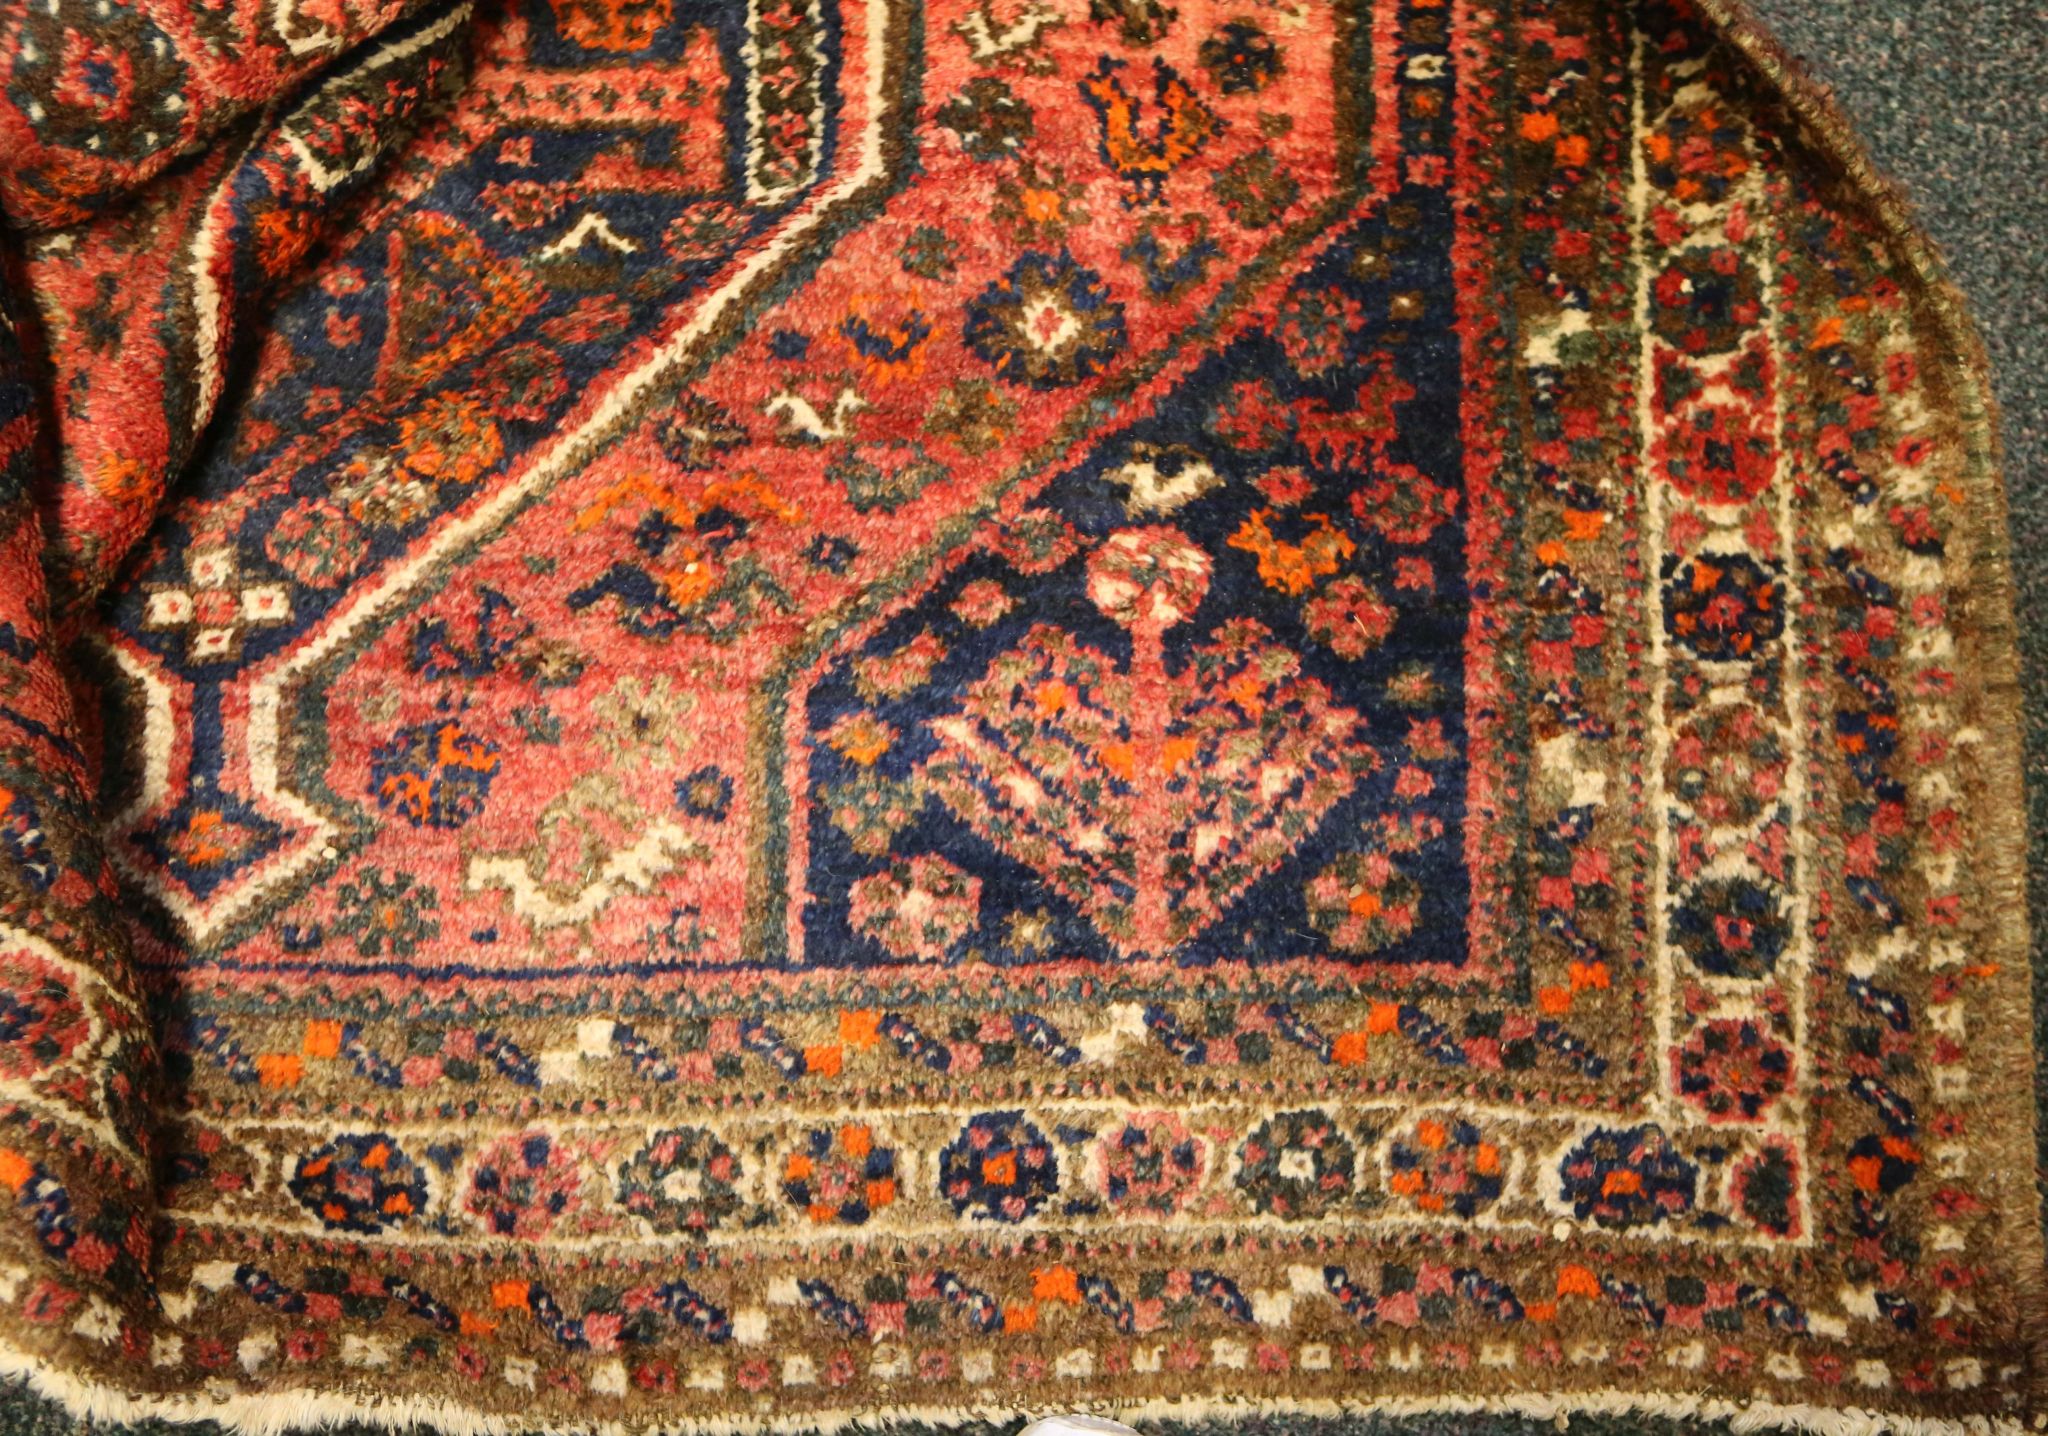 An antique Persian Qashqai rug, with two co-joined diamond lozenges in shades of indigo and deep